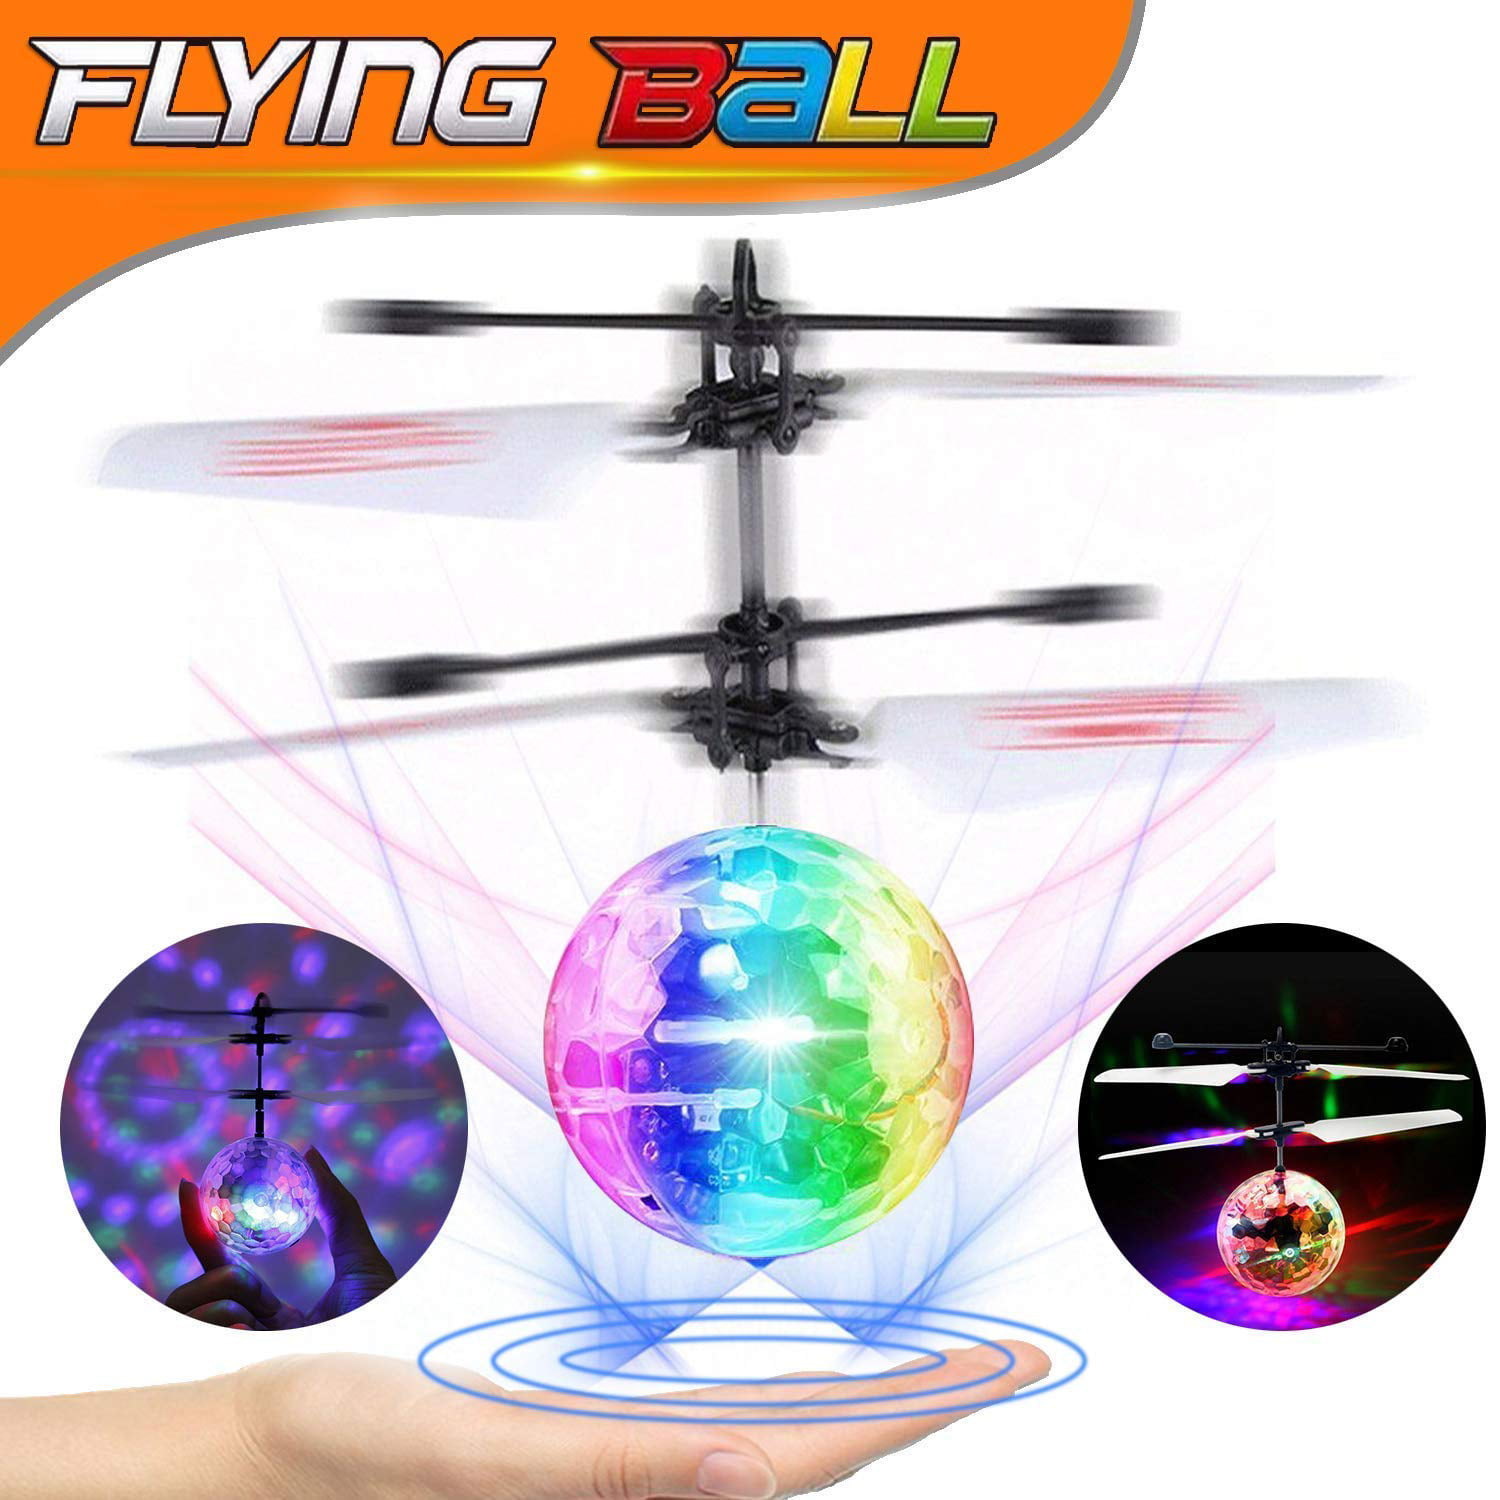 Hand Control Mini Drones Crystal Glow Flying Toys for Kids Boys Girls Birthday Gifts,Helicopter Quadcopter Light Up Ball Toys Indoor Outdoor Multiplayer Games RUIQIMAO RC Flying Ball